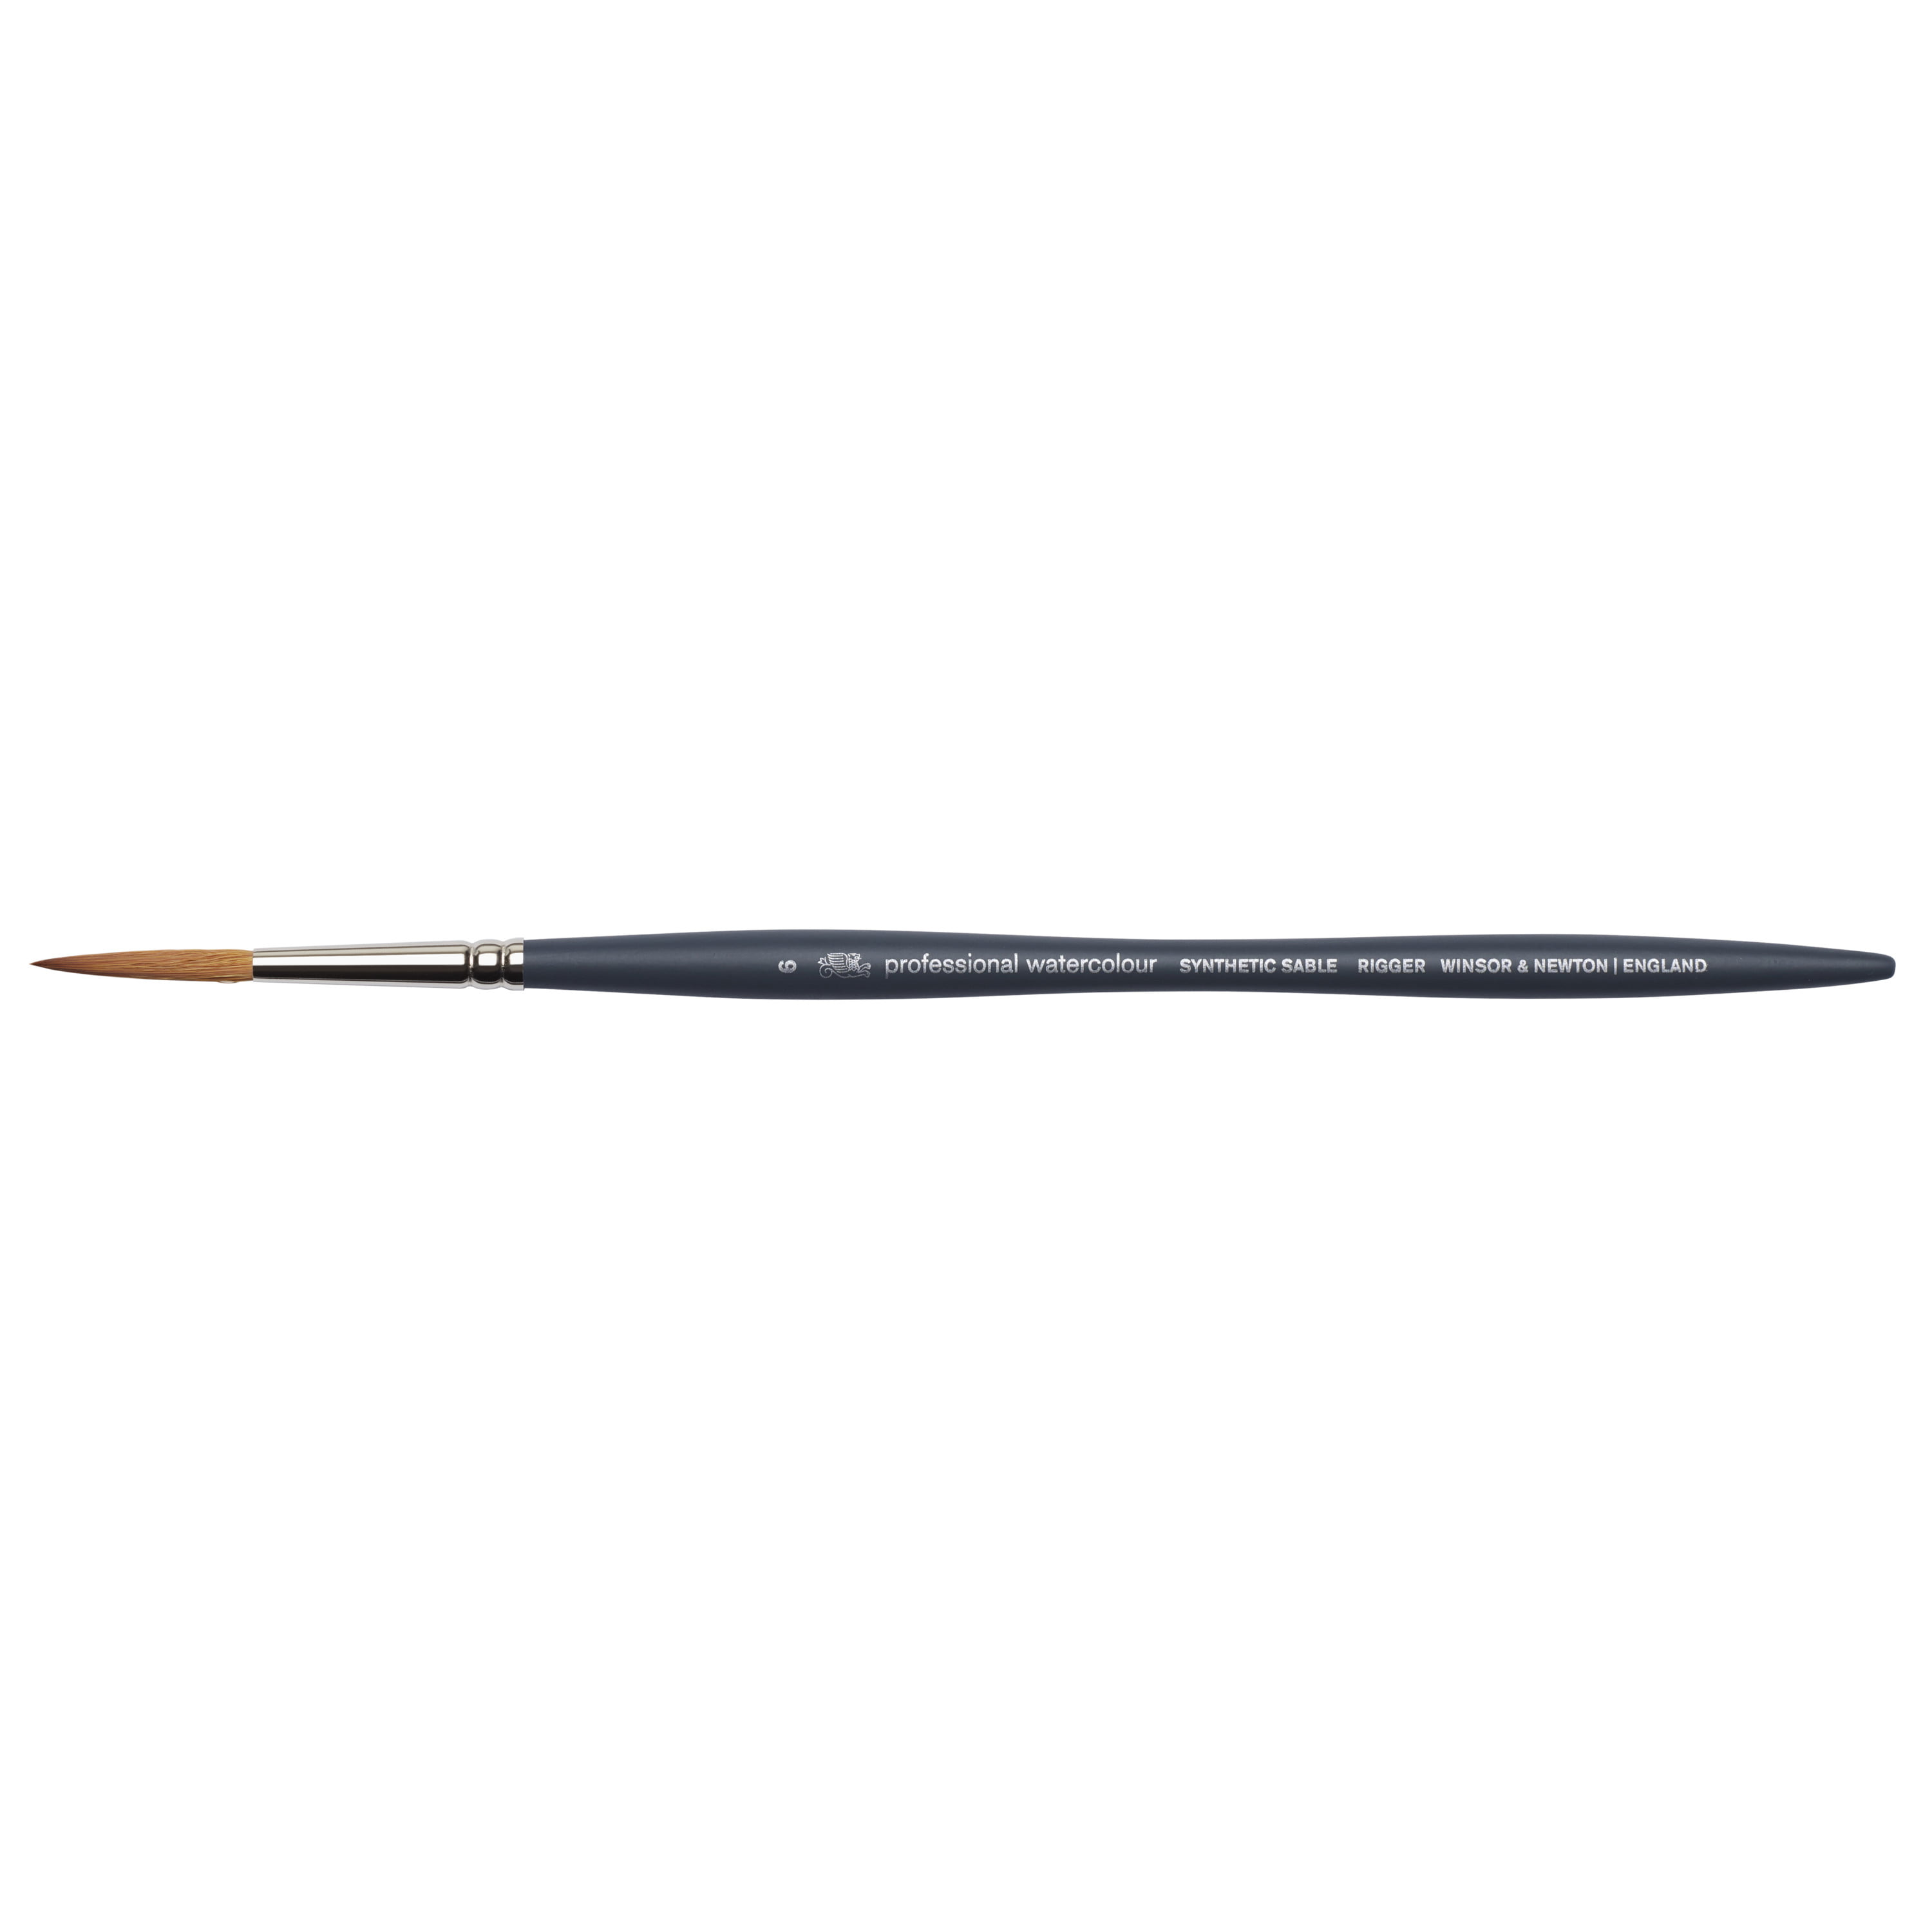 Winsor & Newton Professional Watercolor Synthetic Sable Brush, Rigger, 6